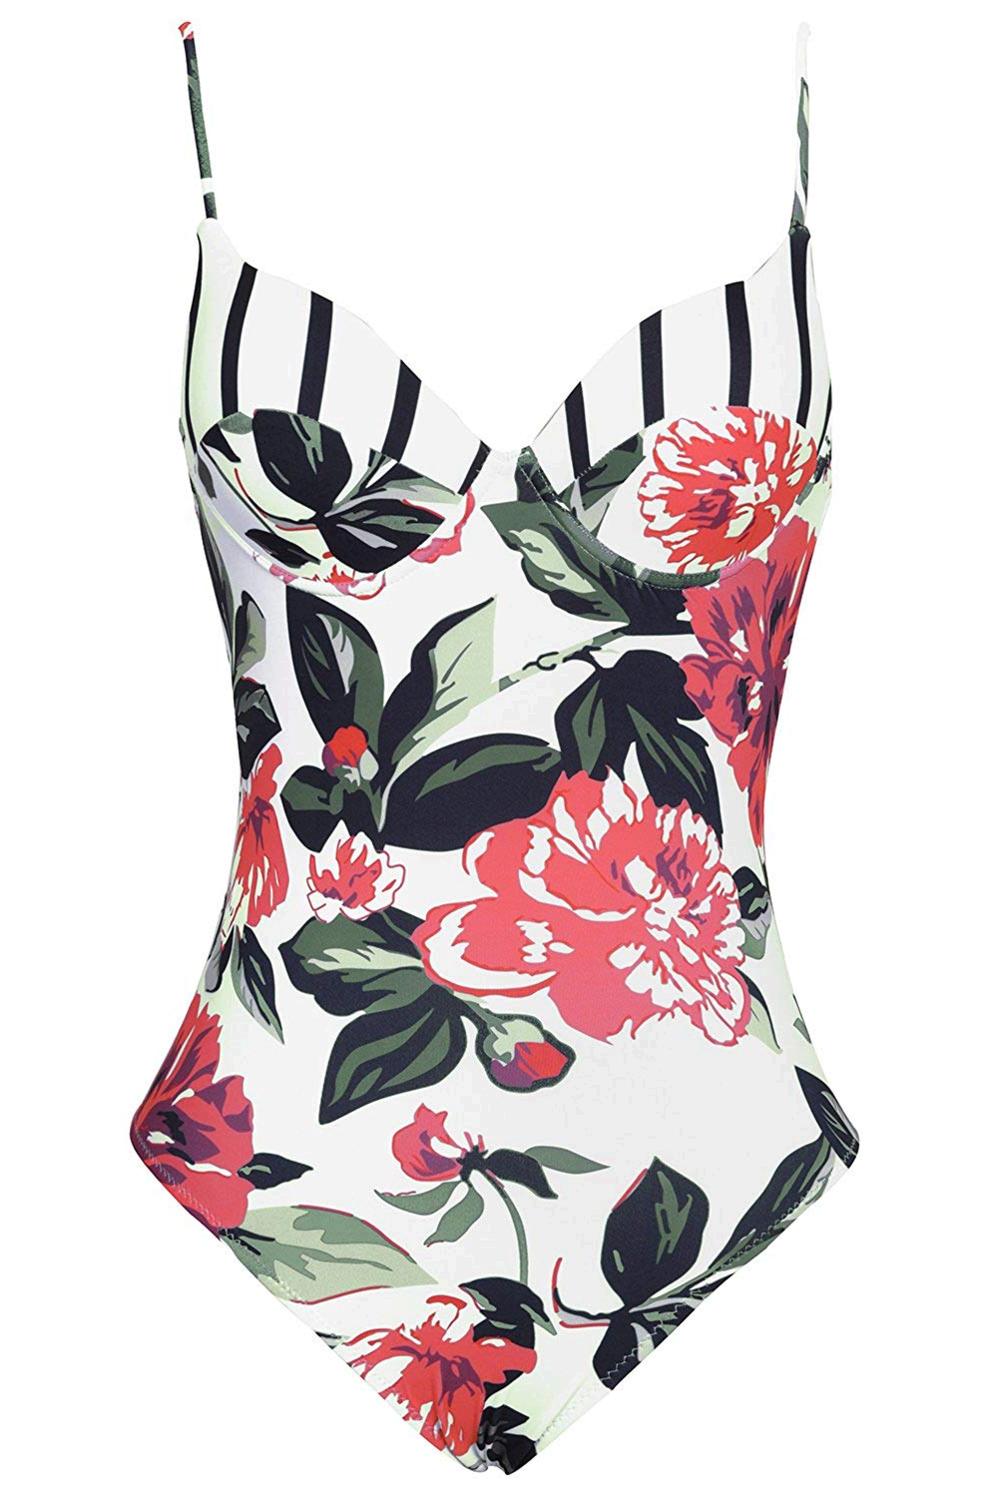 CUPSHE Women's Floral Printing One-Piece Swimsuit Beach, Floral, Size ...